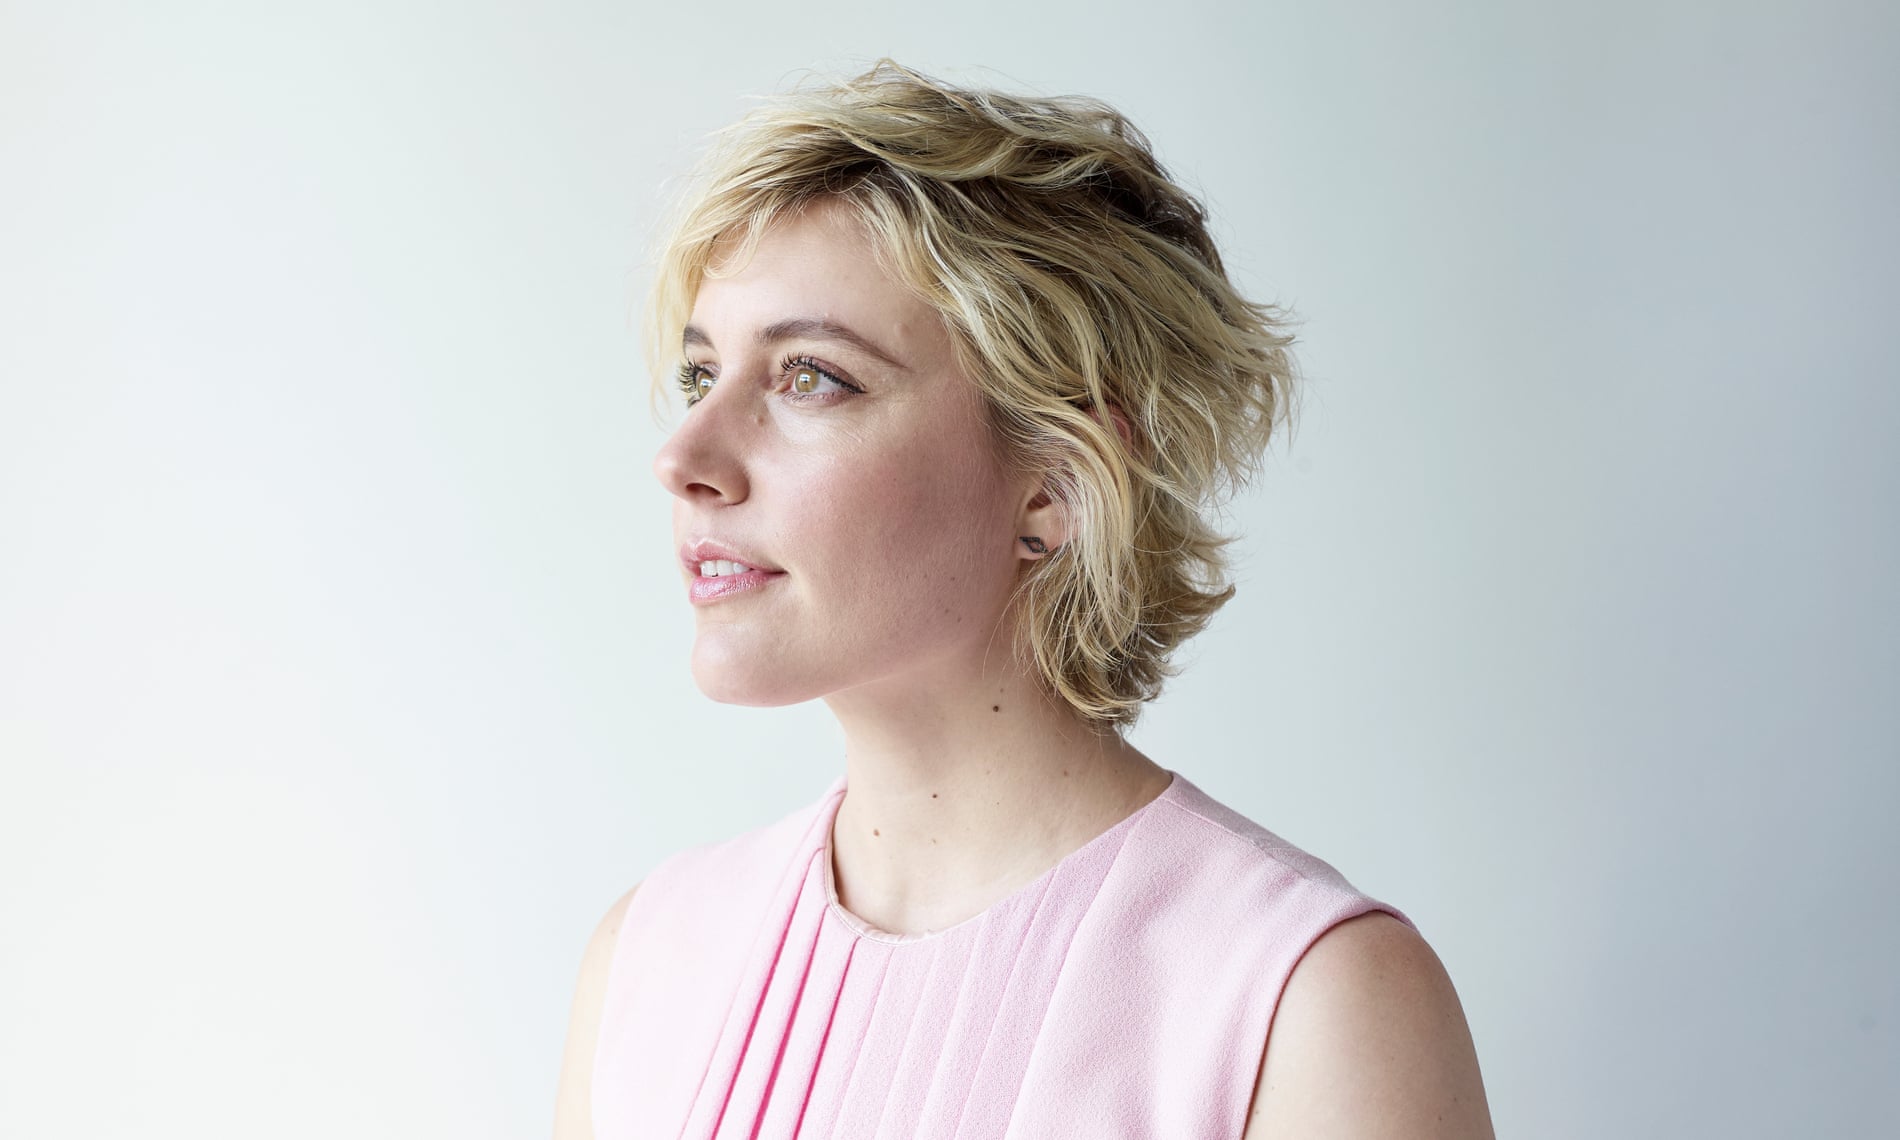 Director Greta Gerwig: ‘I remember when Kathryn Bigelow won, how possibilities were expanded.’